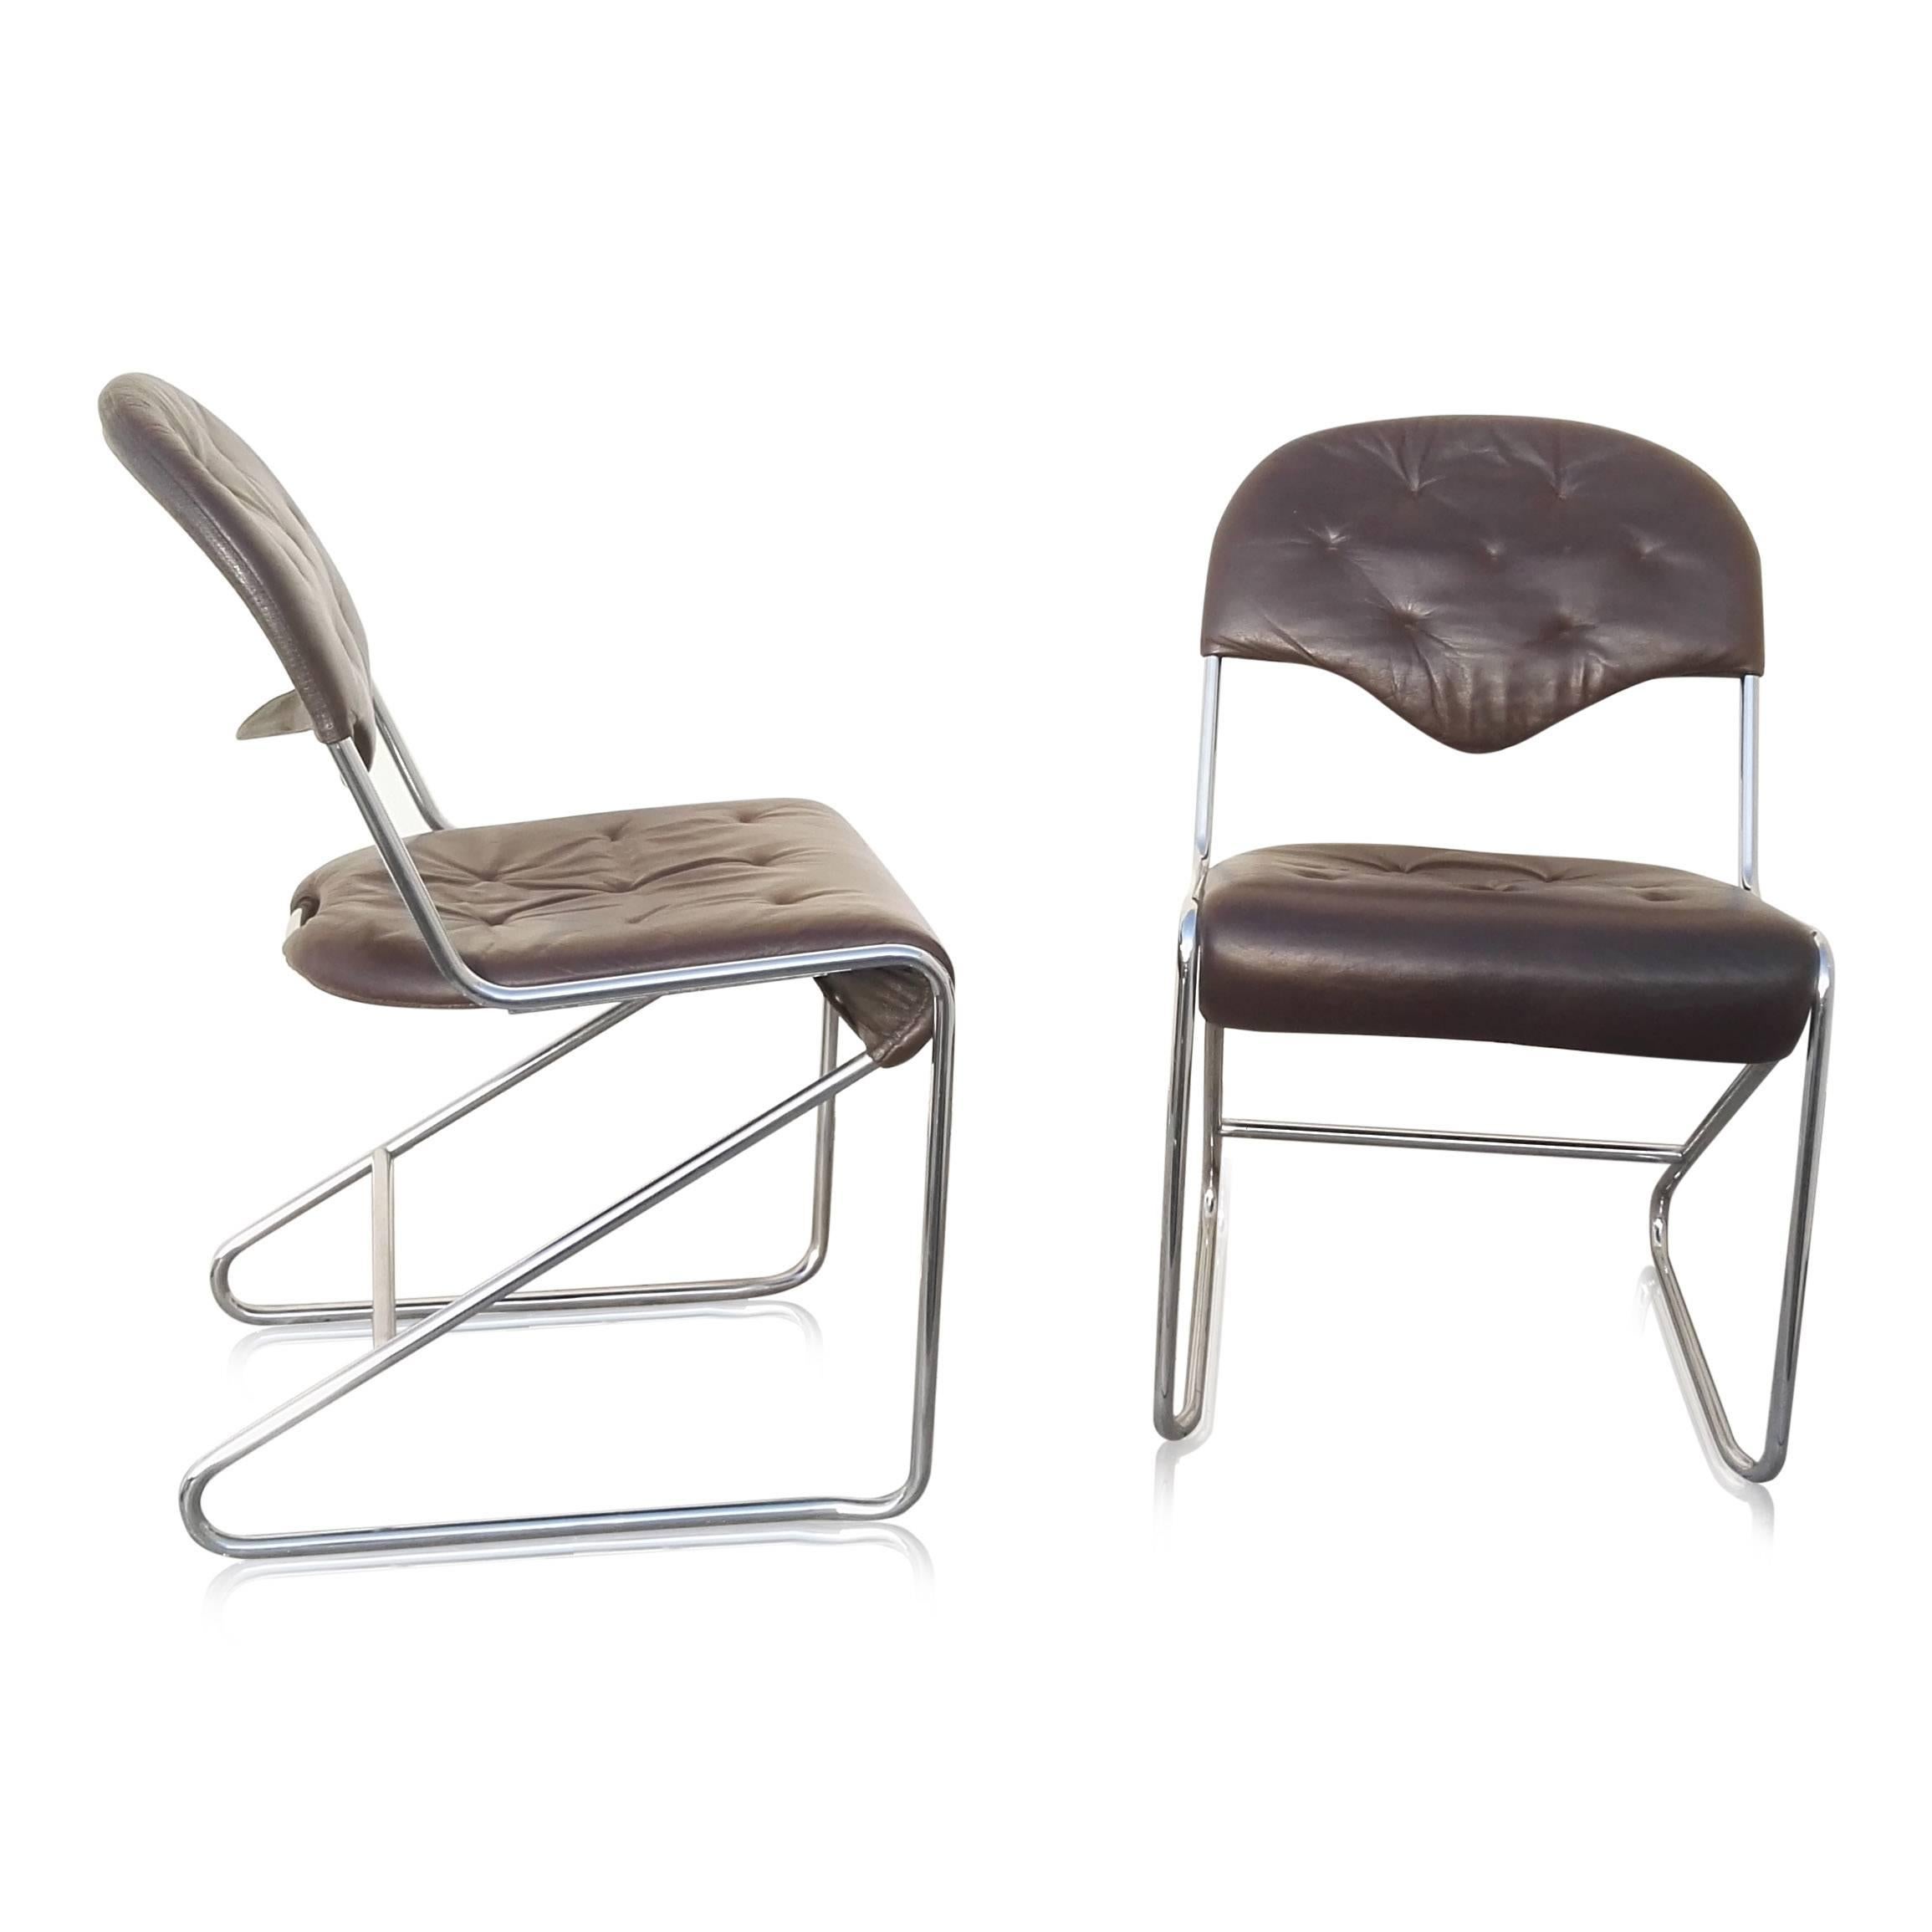 In the style of Tucroma chairs by Guido Faleschini
chrome in very good vintage condition
minor cracks on at the stitches level on the leather
this item will ship from France.
Price does not include handling, shipping and possible customs related